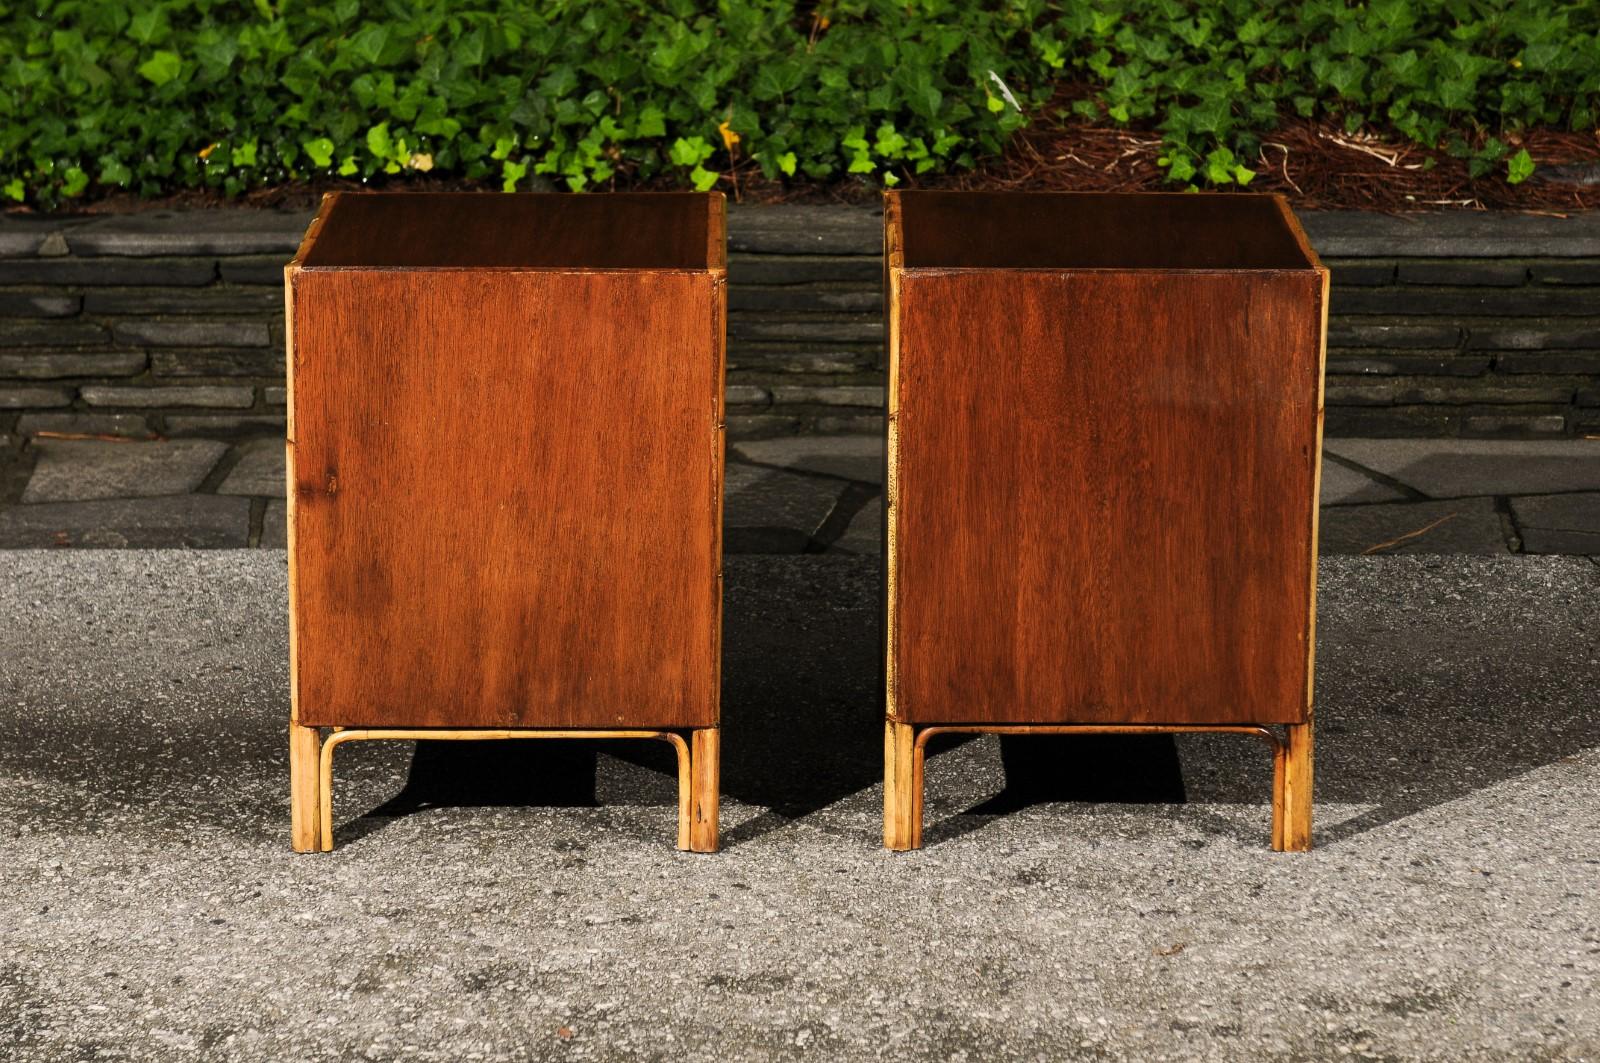 Magnificent Restored Mahogany and Rattan End Tables, Philippines, circa 1950 For Sale 5